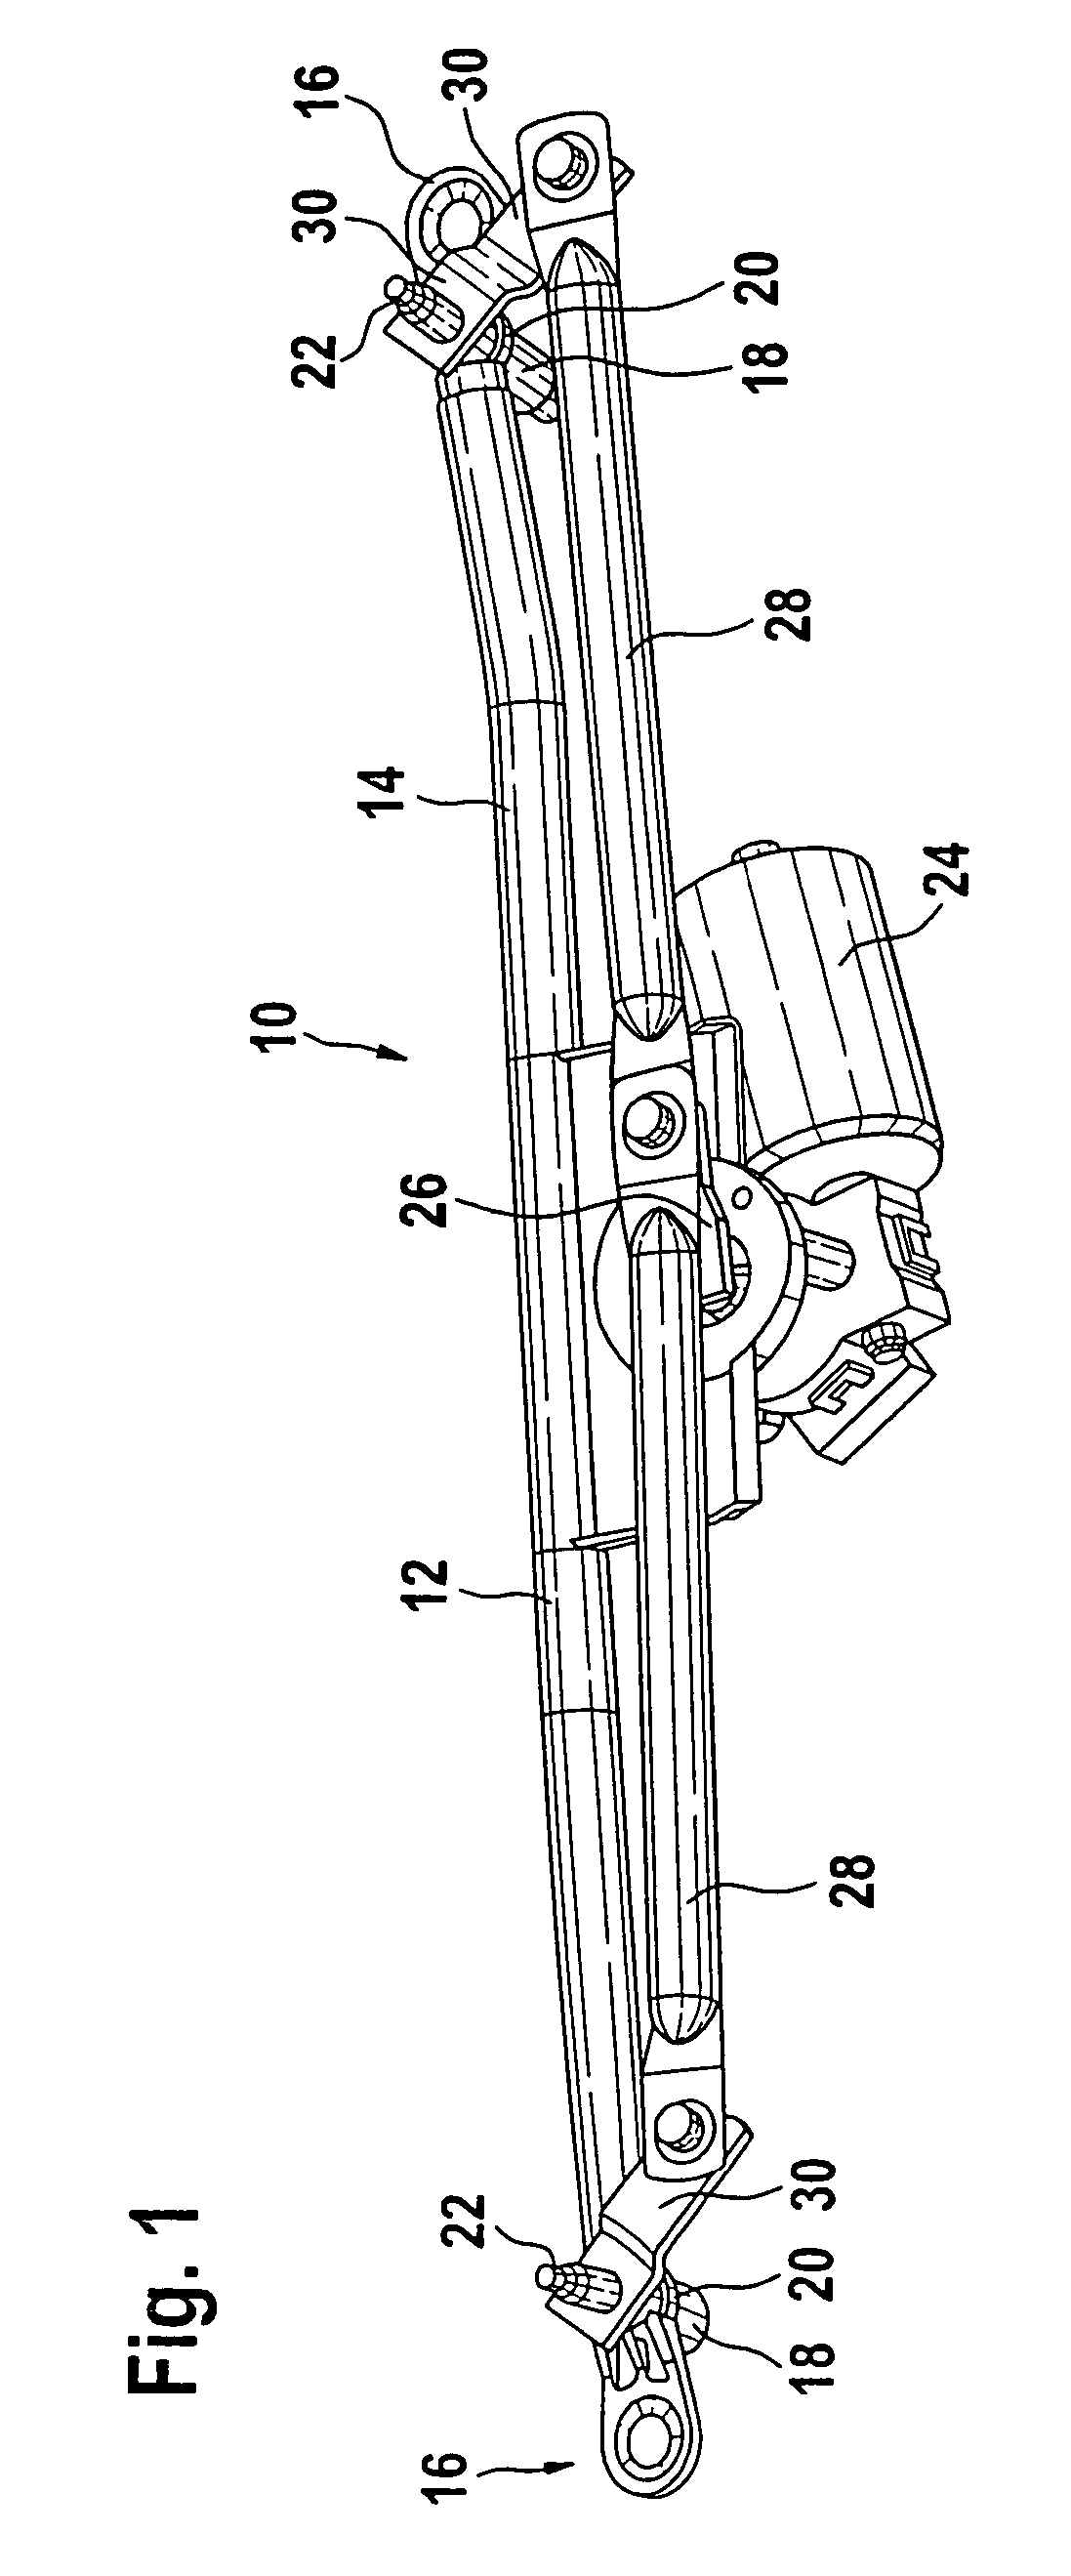 Windscreen wiper device, in particular for a motor vehicle